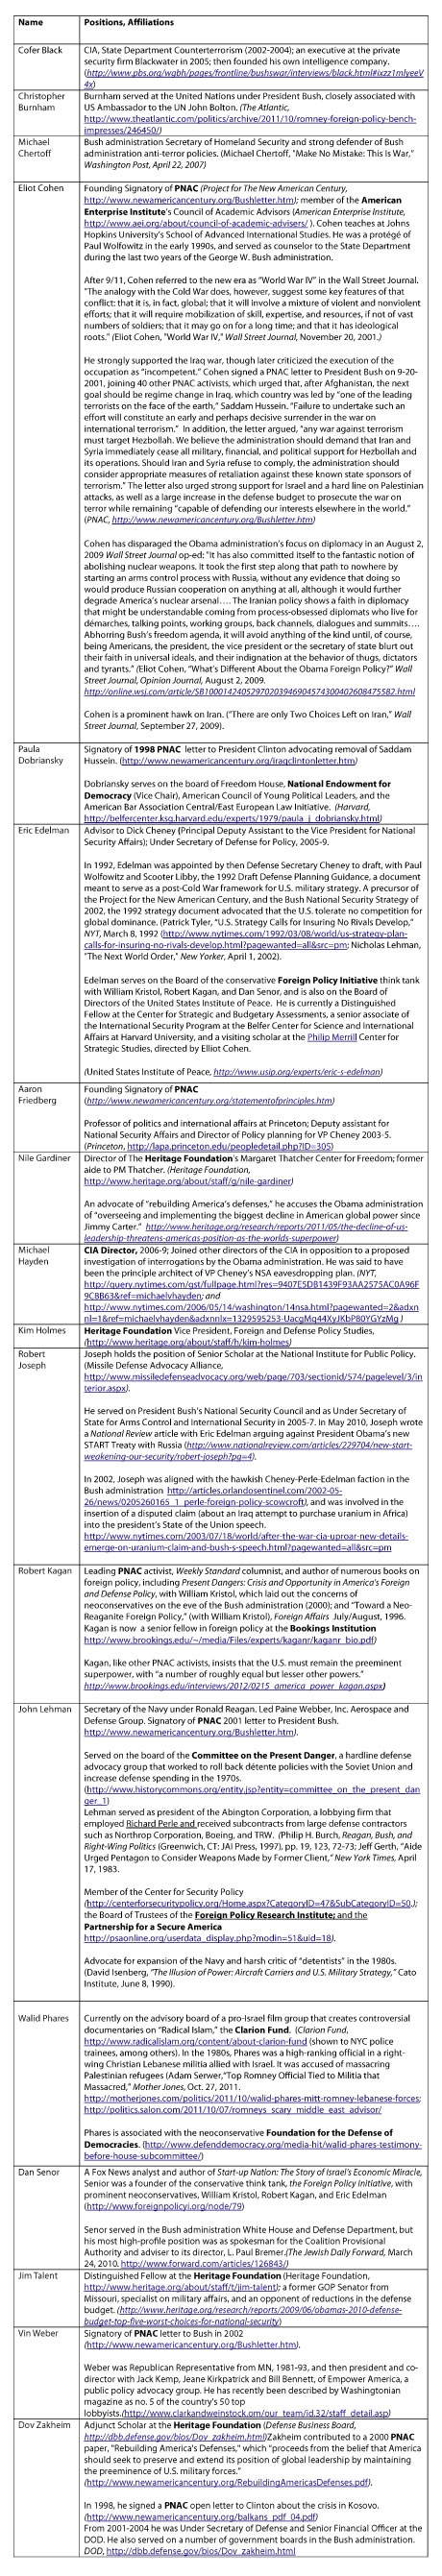 Table 1. Romney Foreign Policy Advisers: Positions and Affiliations (think tanks in bold)